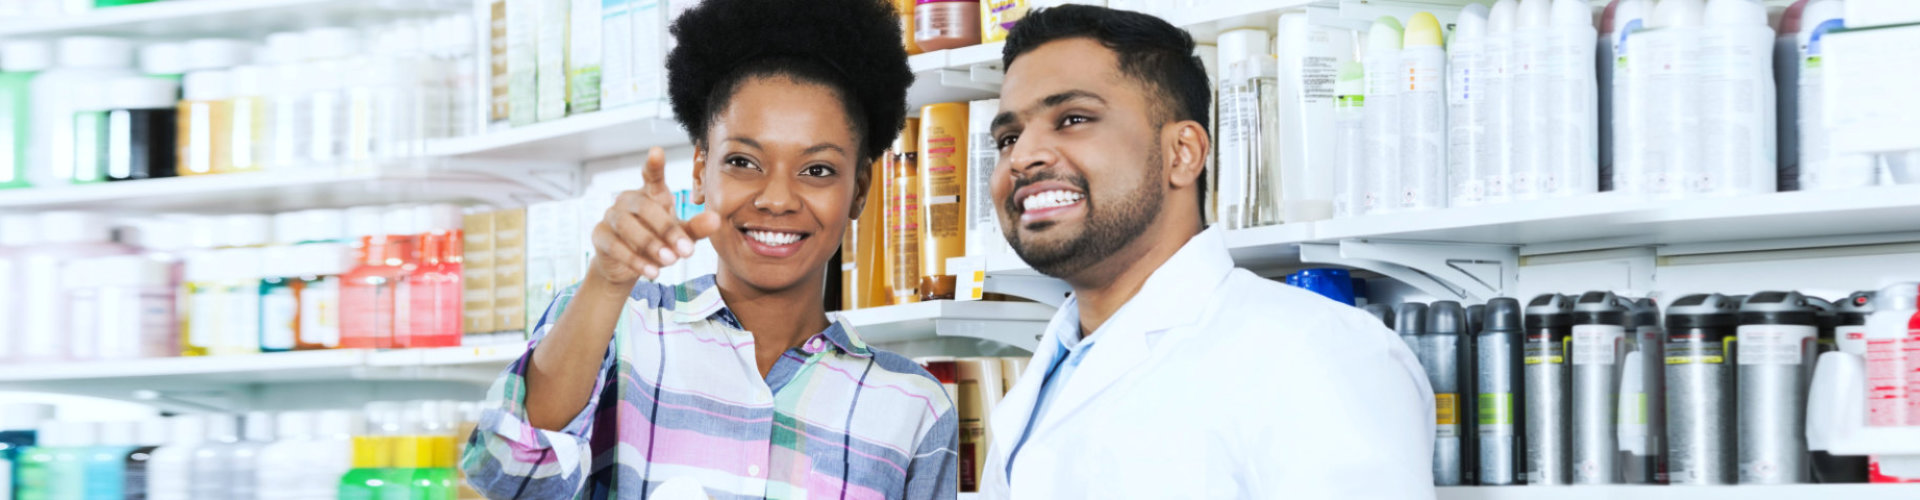 male pharmacist and adult woman smiling